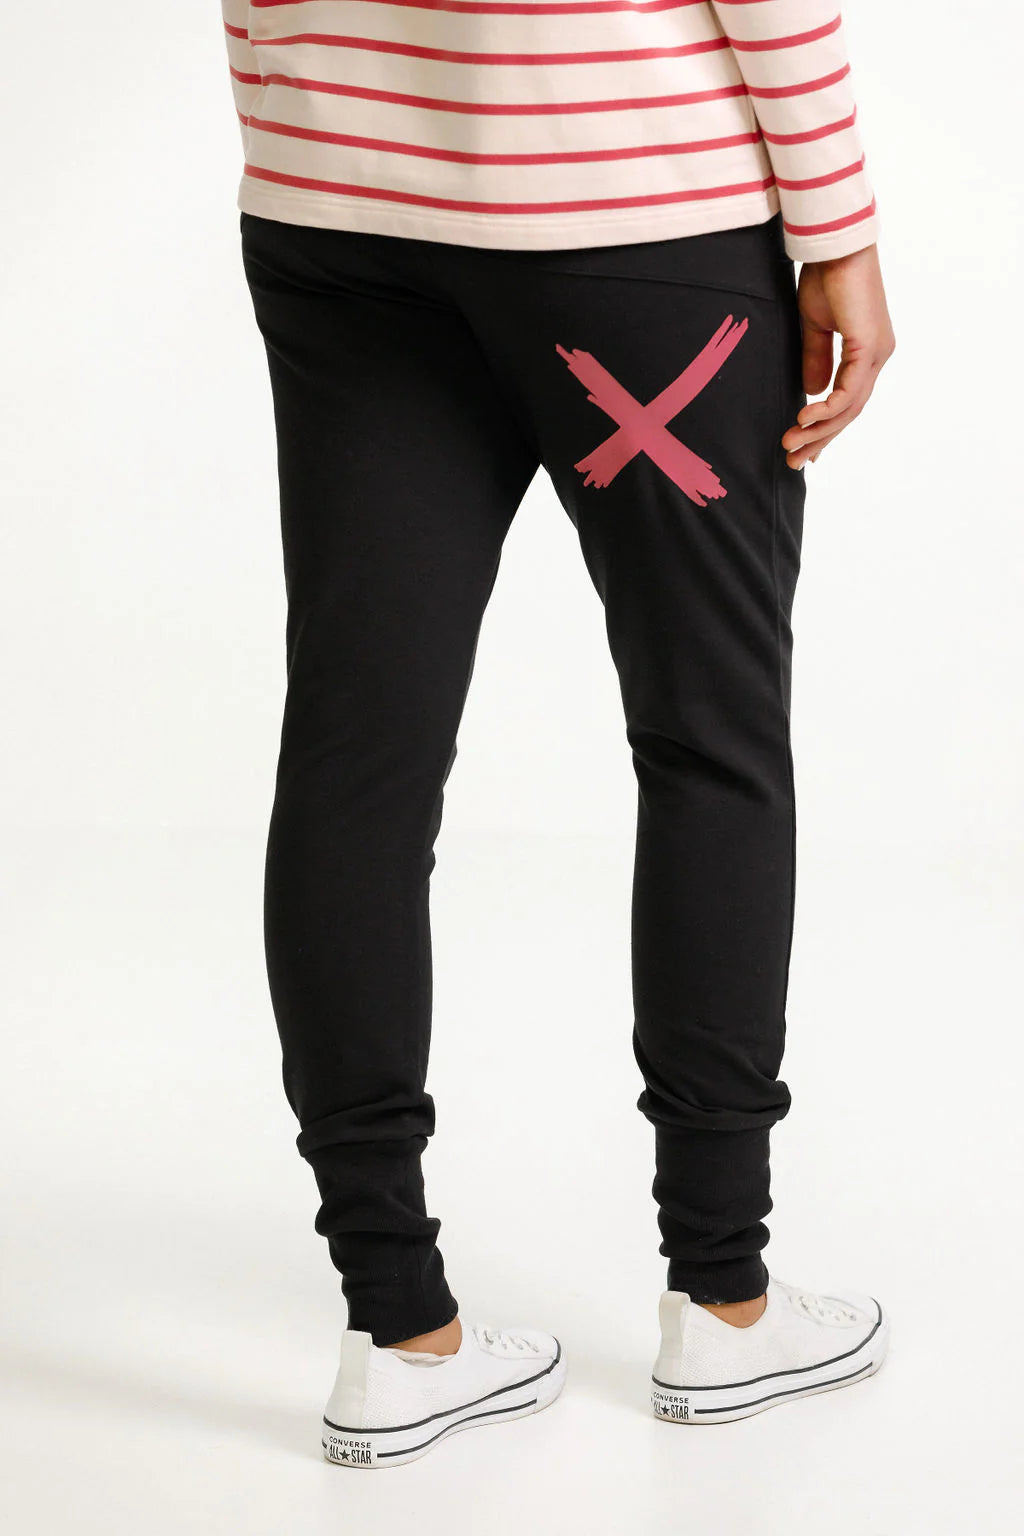 Homelee Apartment Pants - Winter Weight Black with Tandoori X